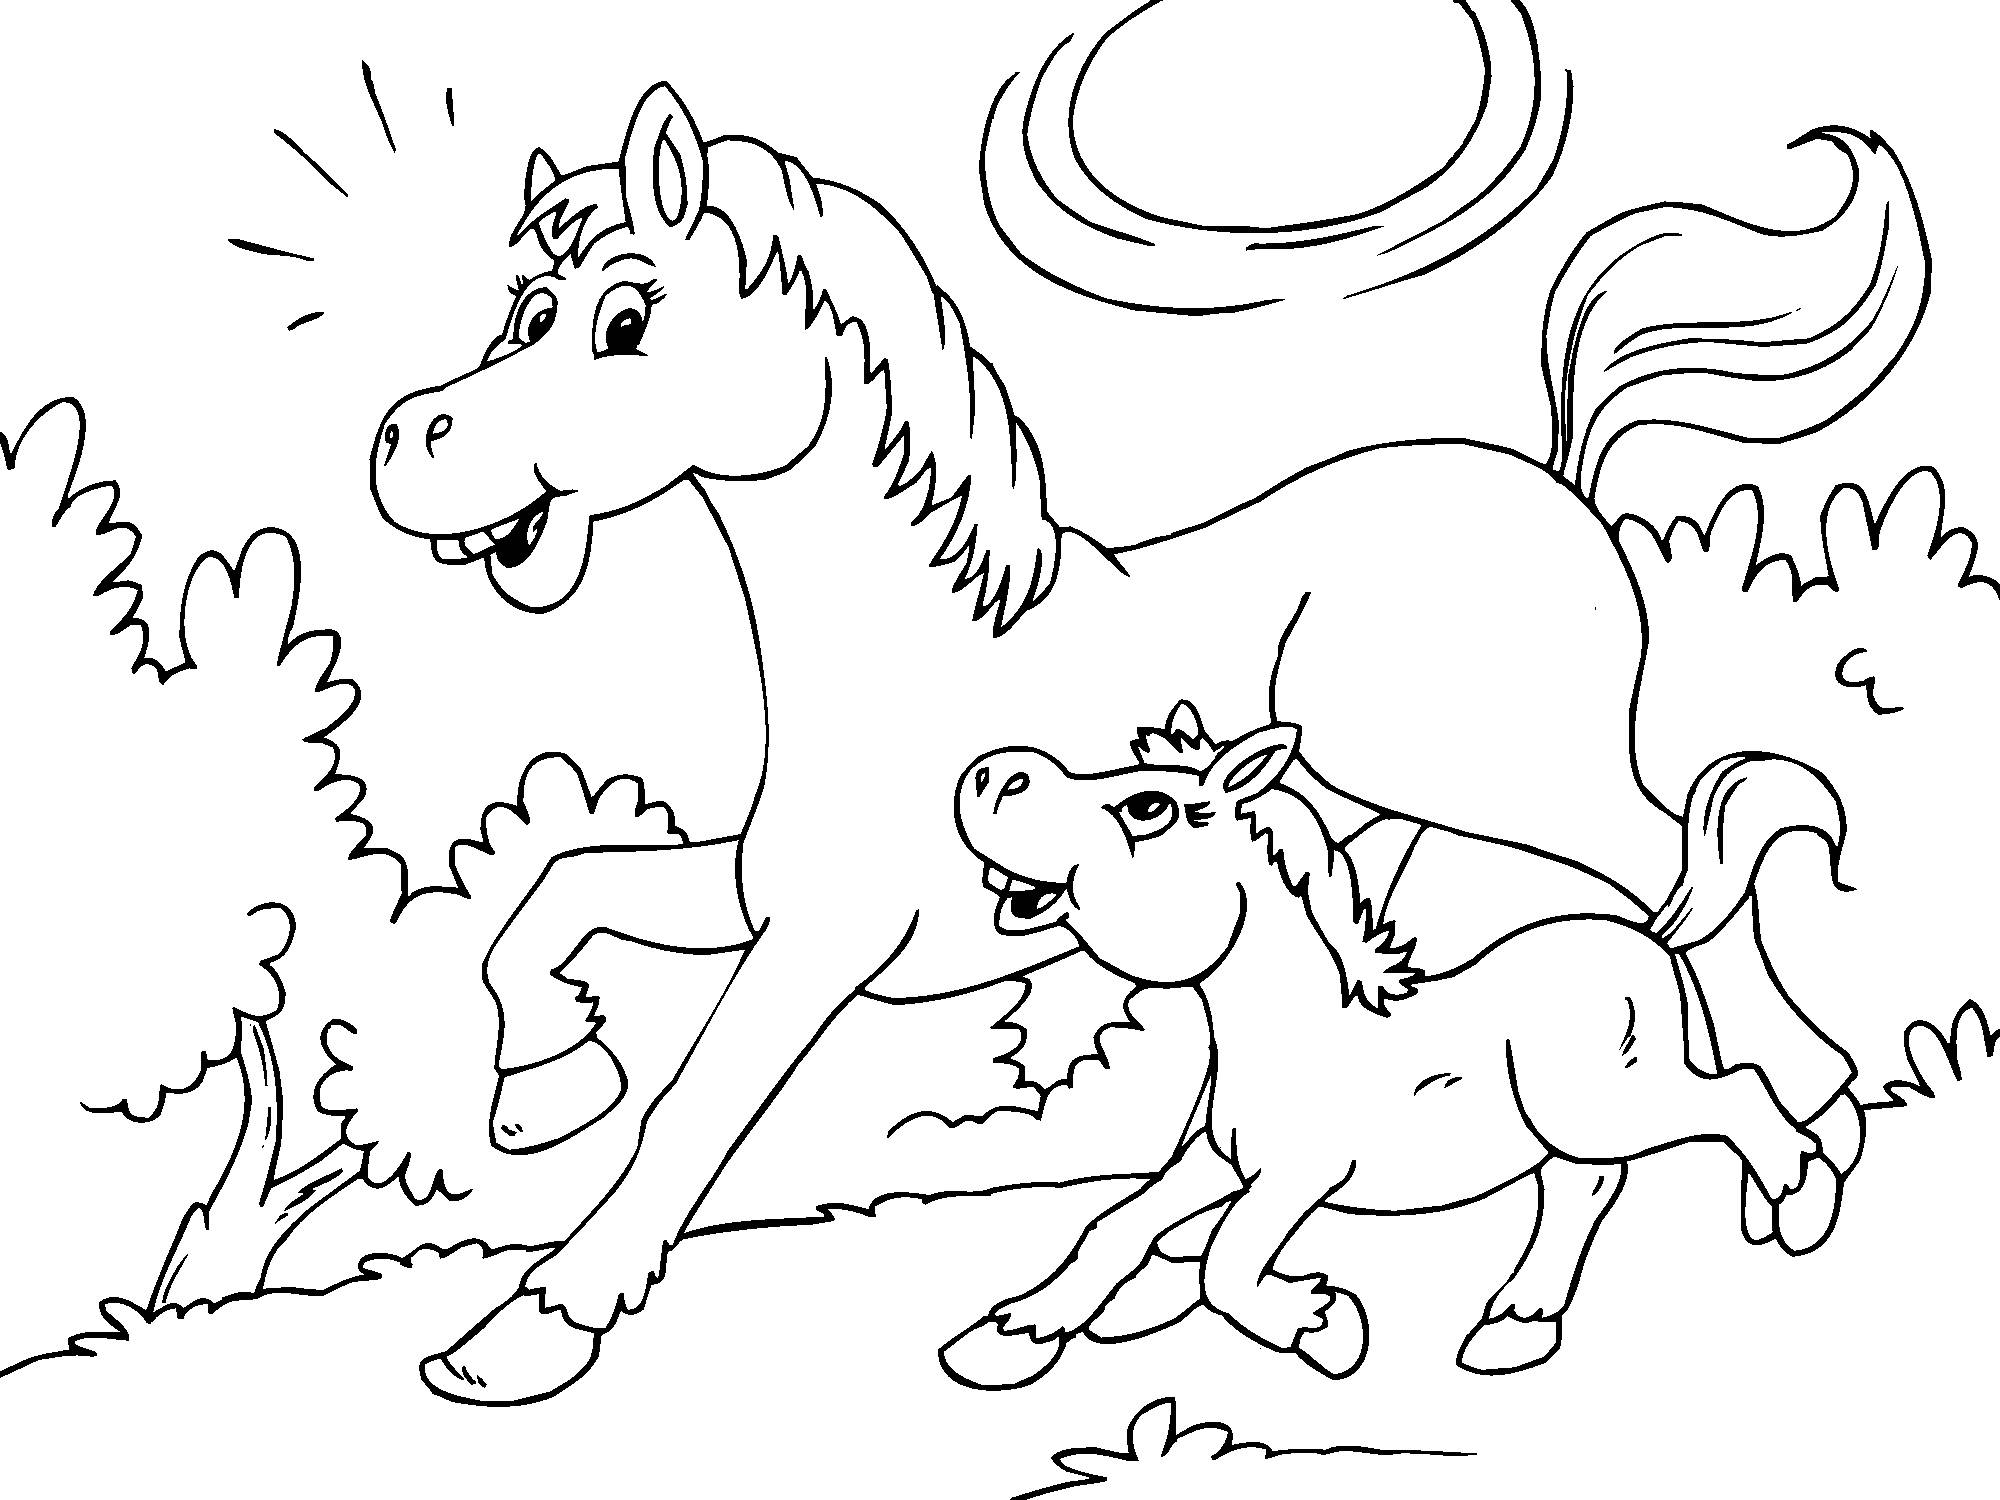 Playful horse coloring for kids